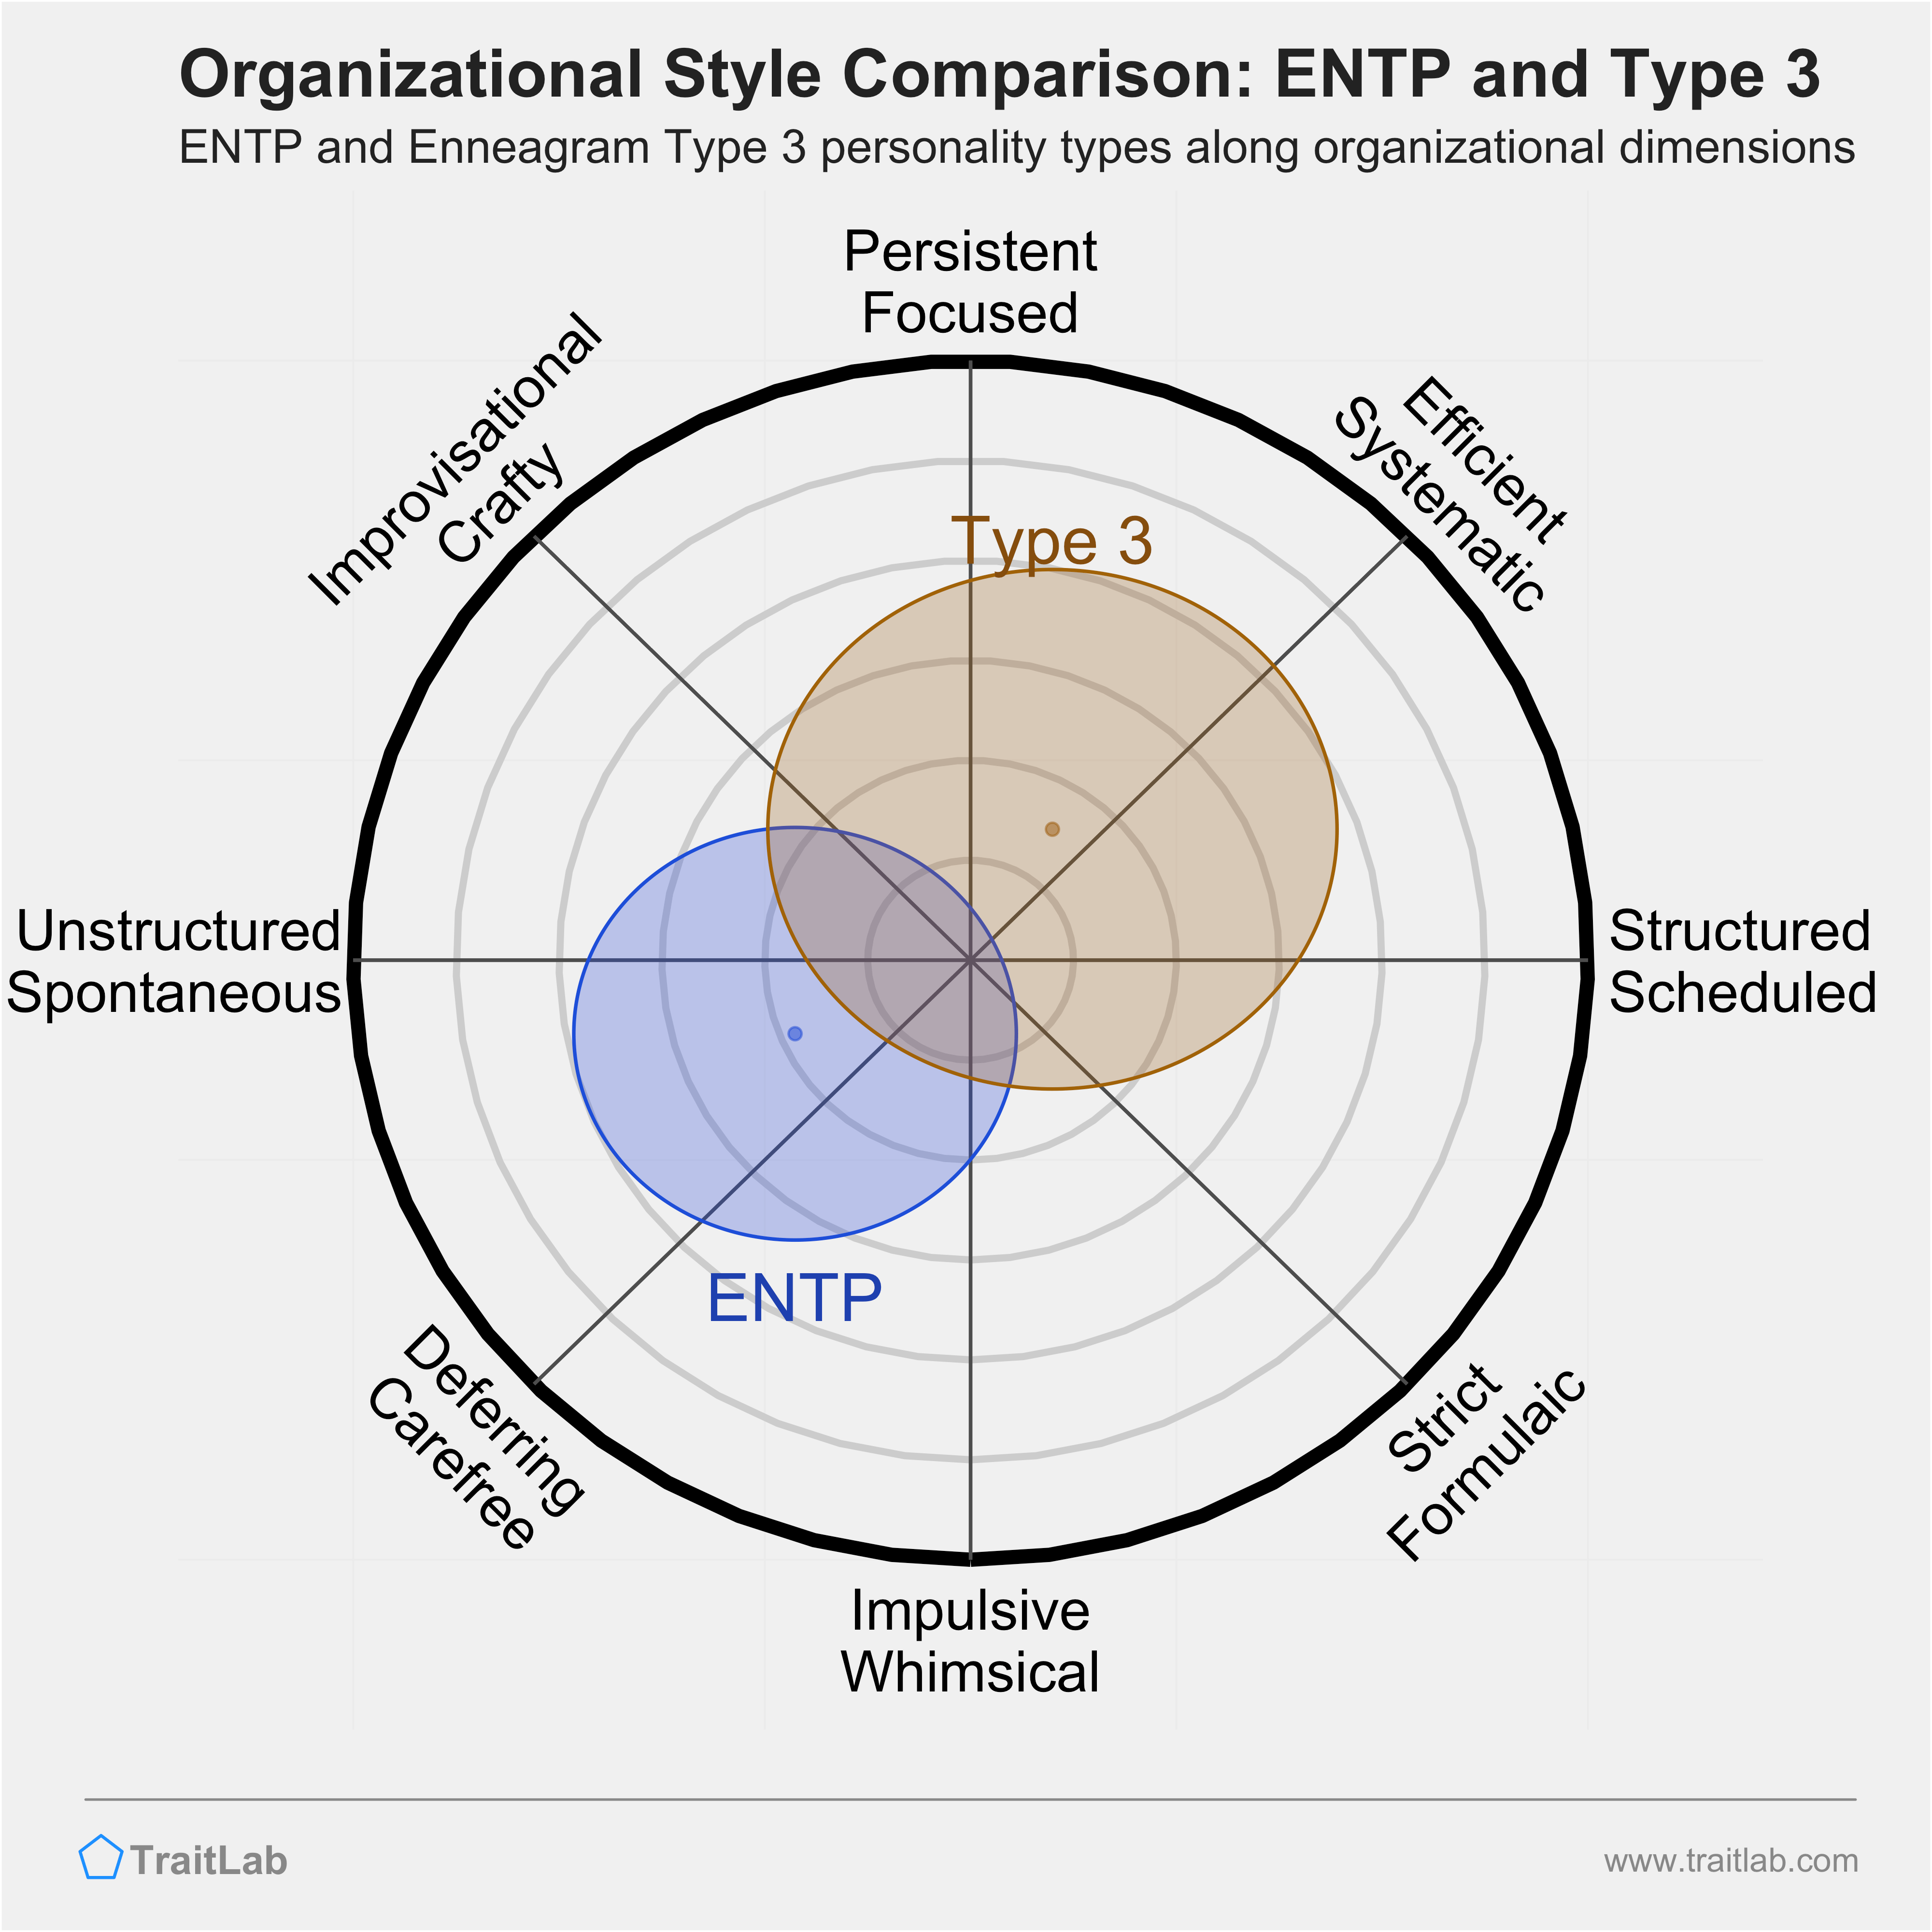 ENTP and Type 3 comparison across organizational dimensions